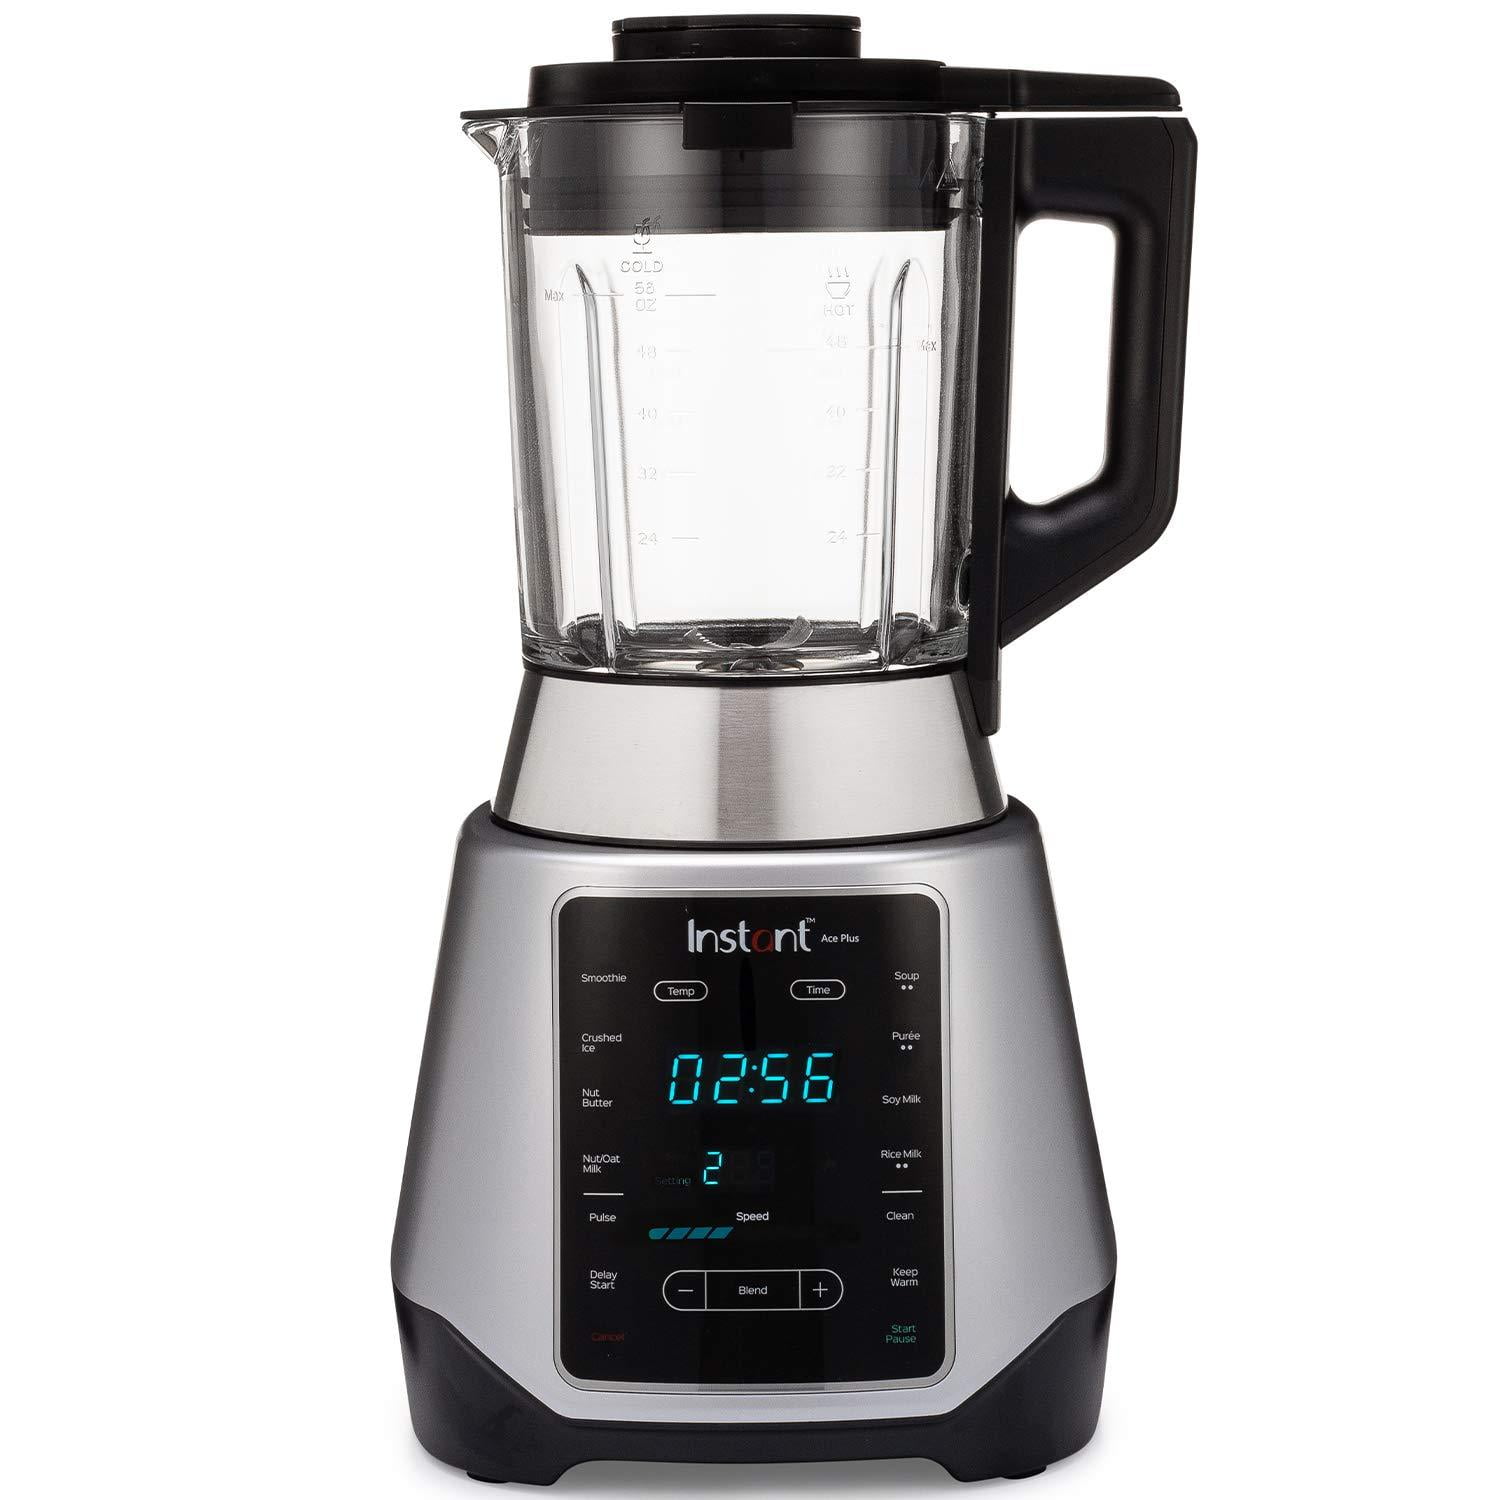 Instant Pot Blender Review: Is the Ace better than a Vitamix? - Reviewed